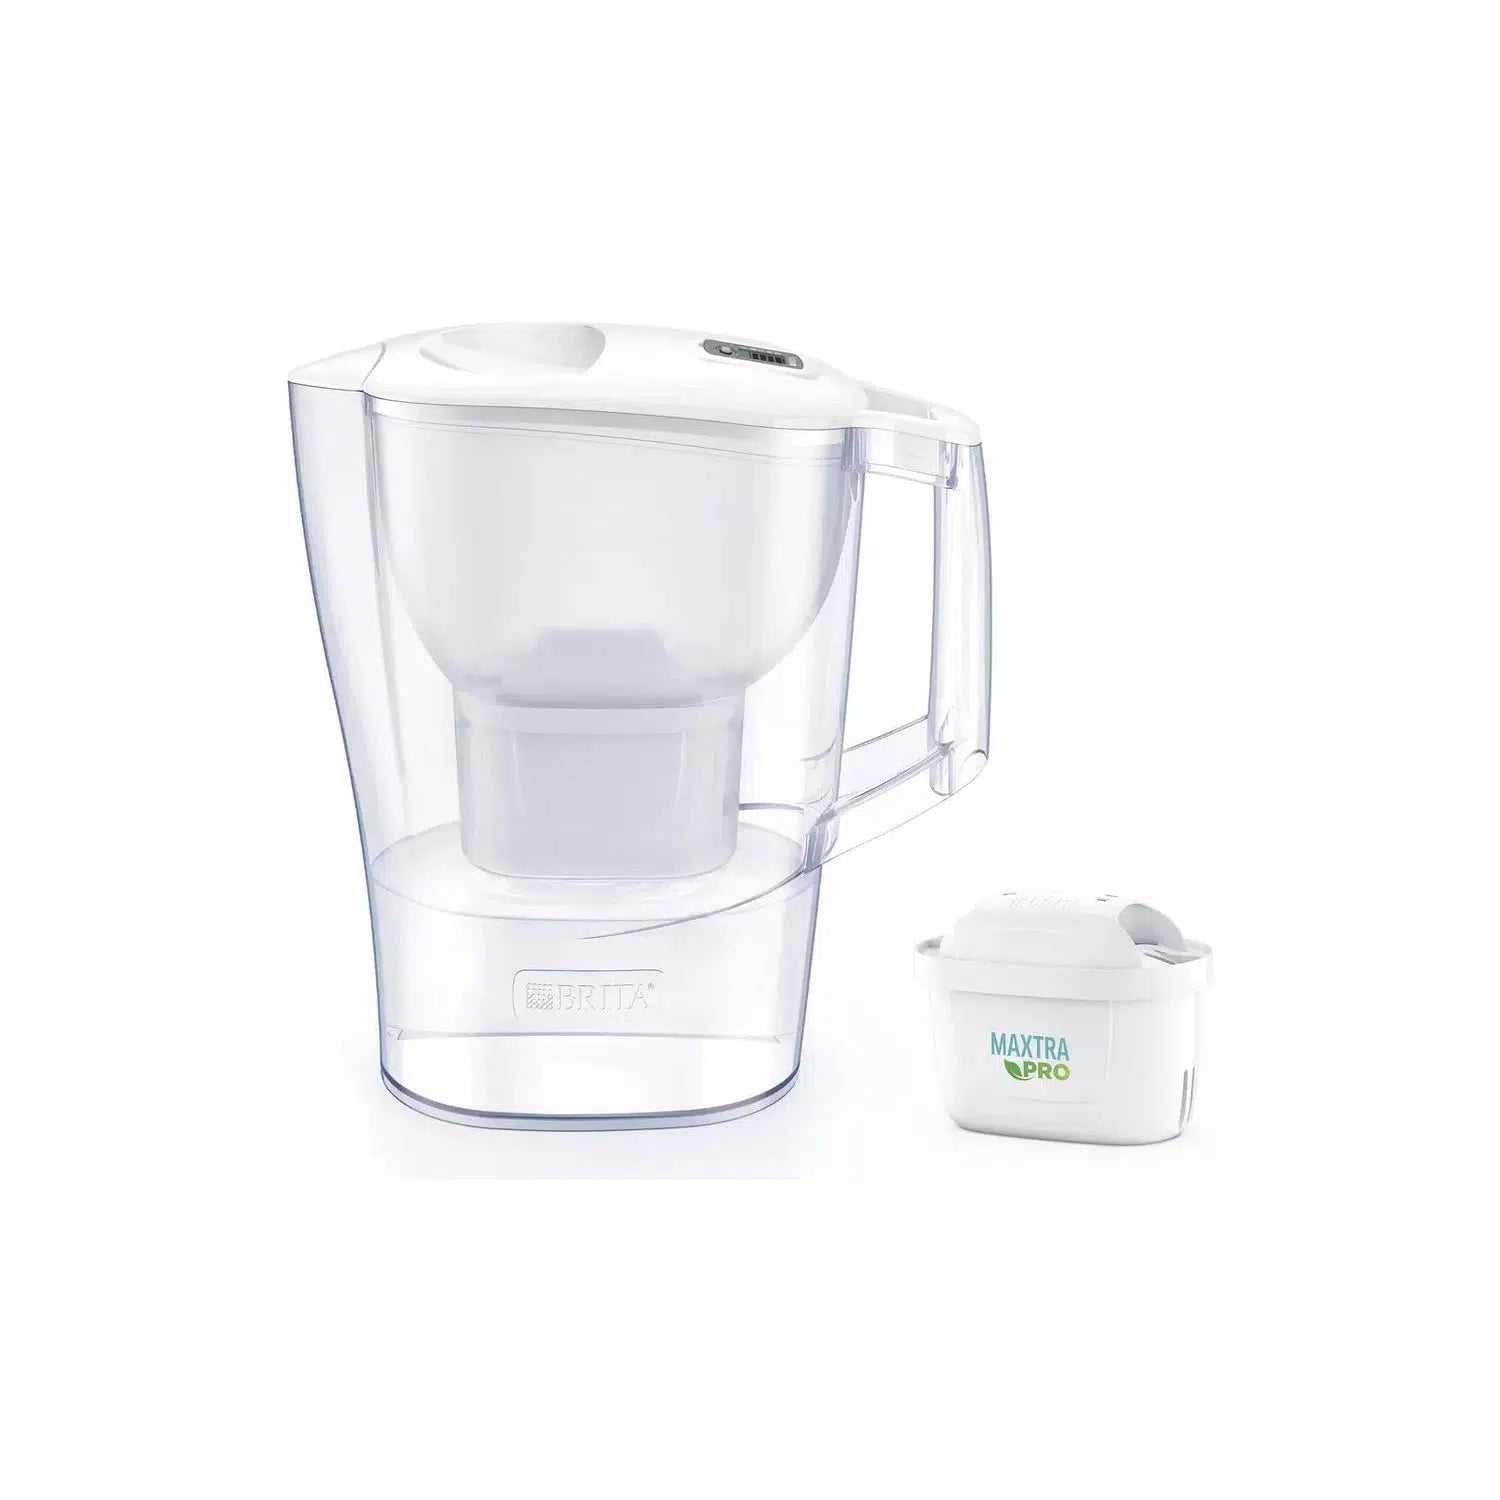 BRITA Glass Jug + MAXTRA PRO ALL-IN-1 water filter cartridge – the  all-around talent for cold and hot drinks. Enjoy freshly filtered water in  an elegant